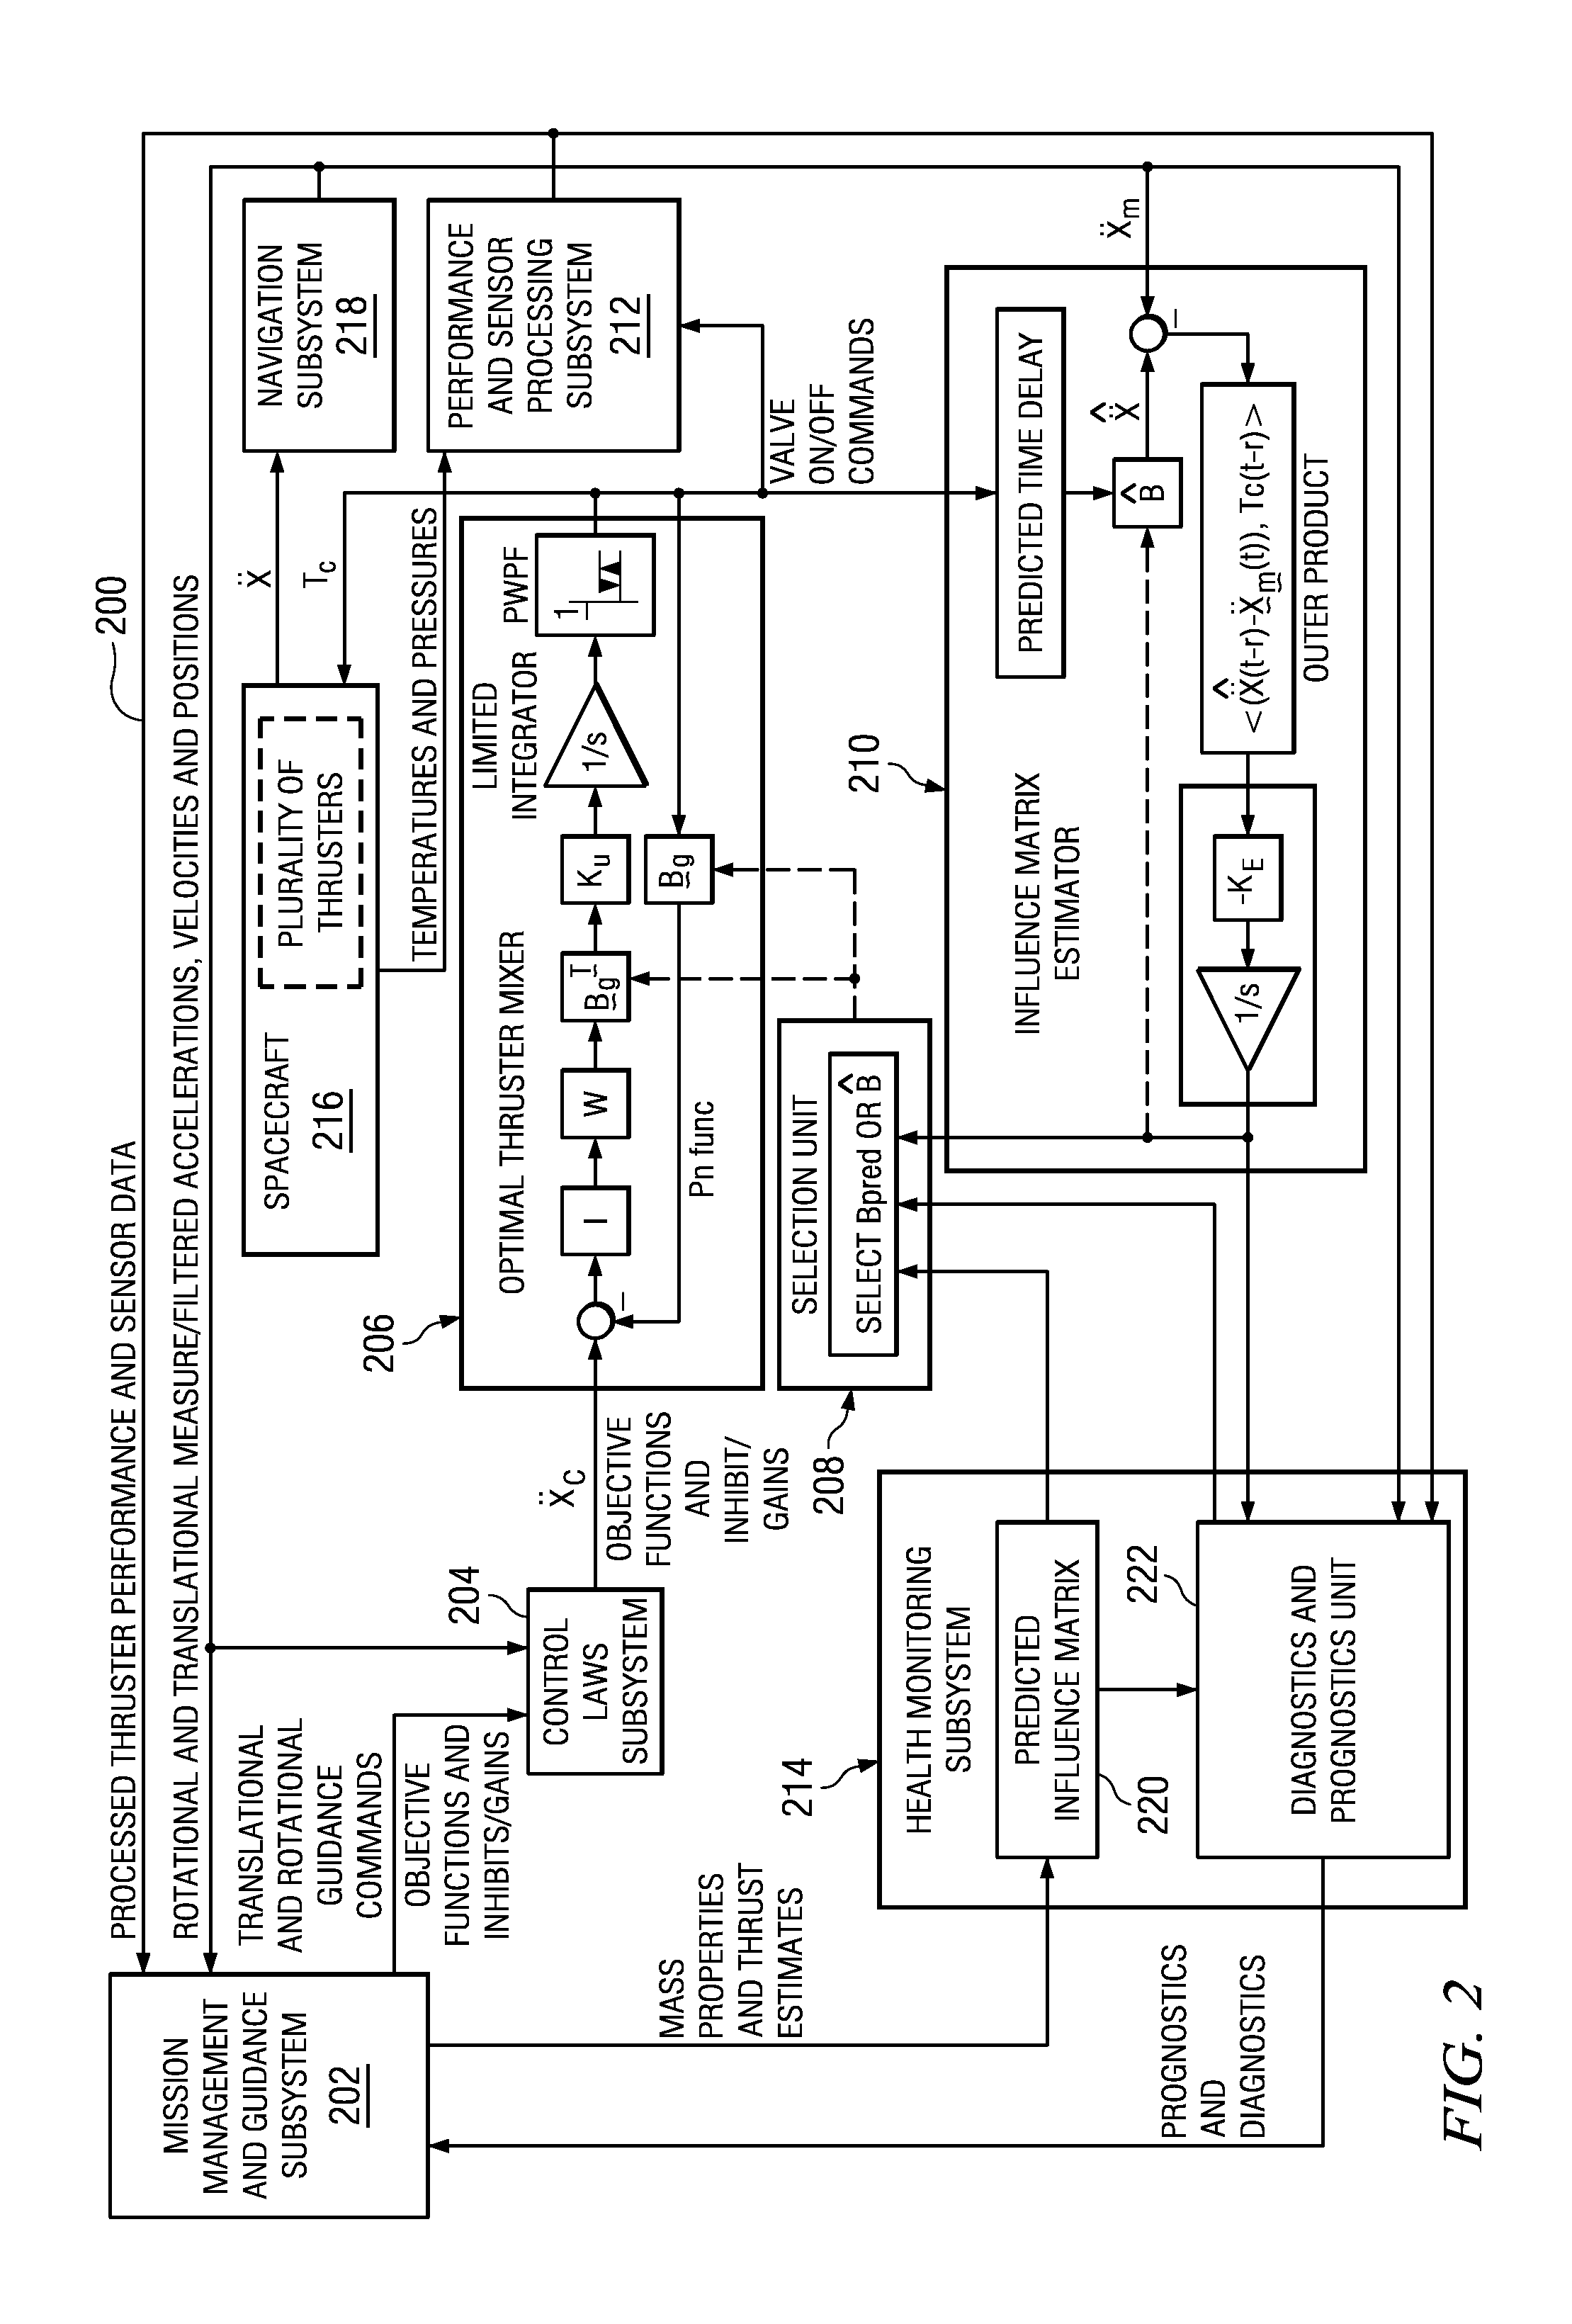 Health-adaptive reaction control system